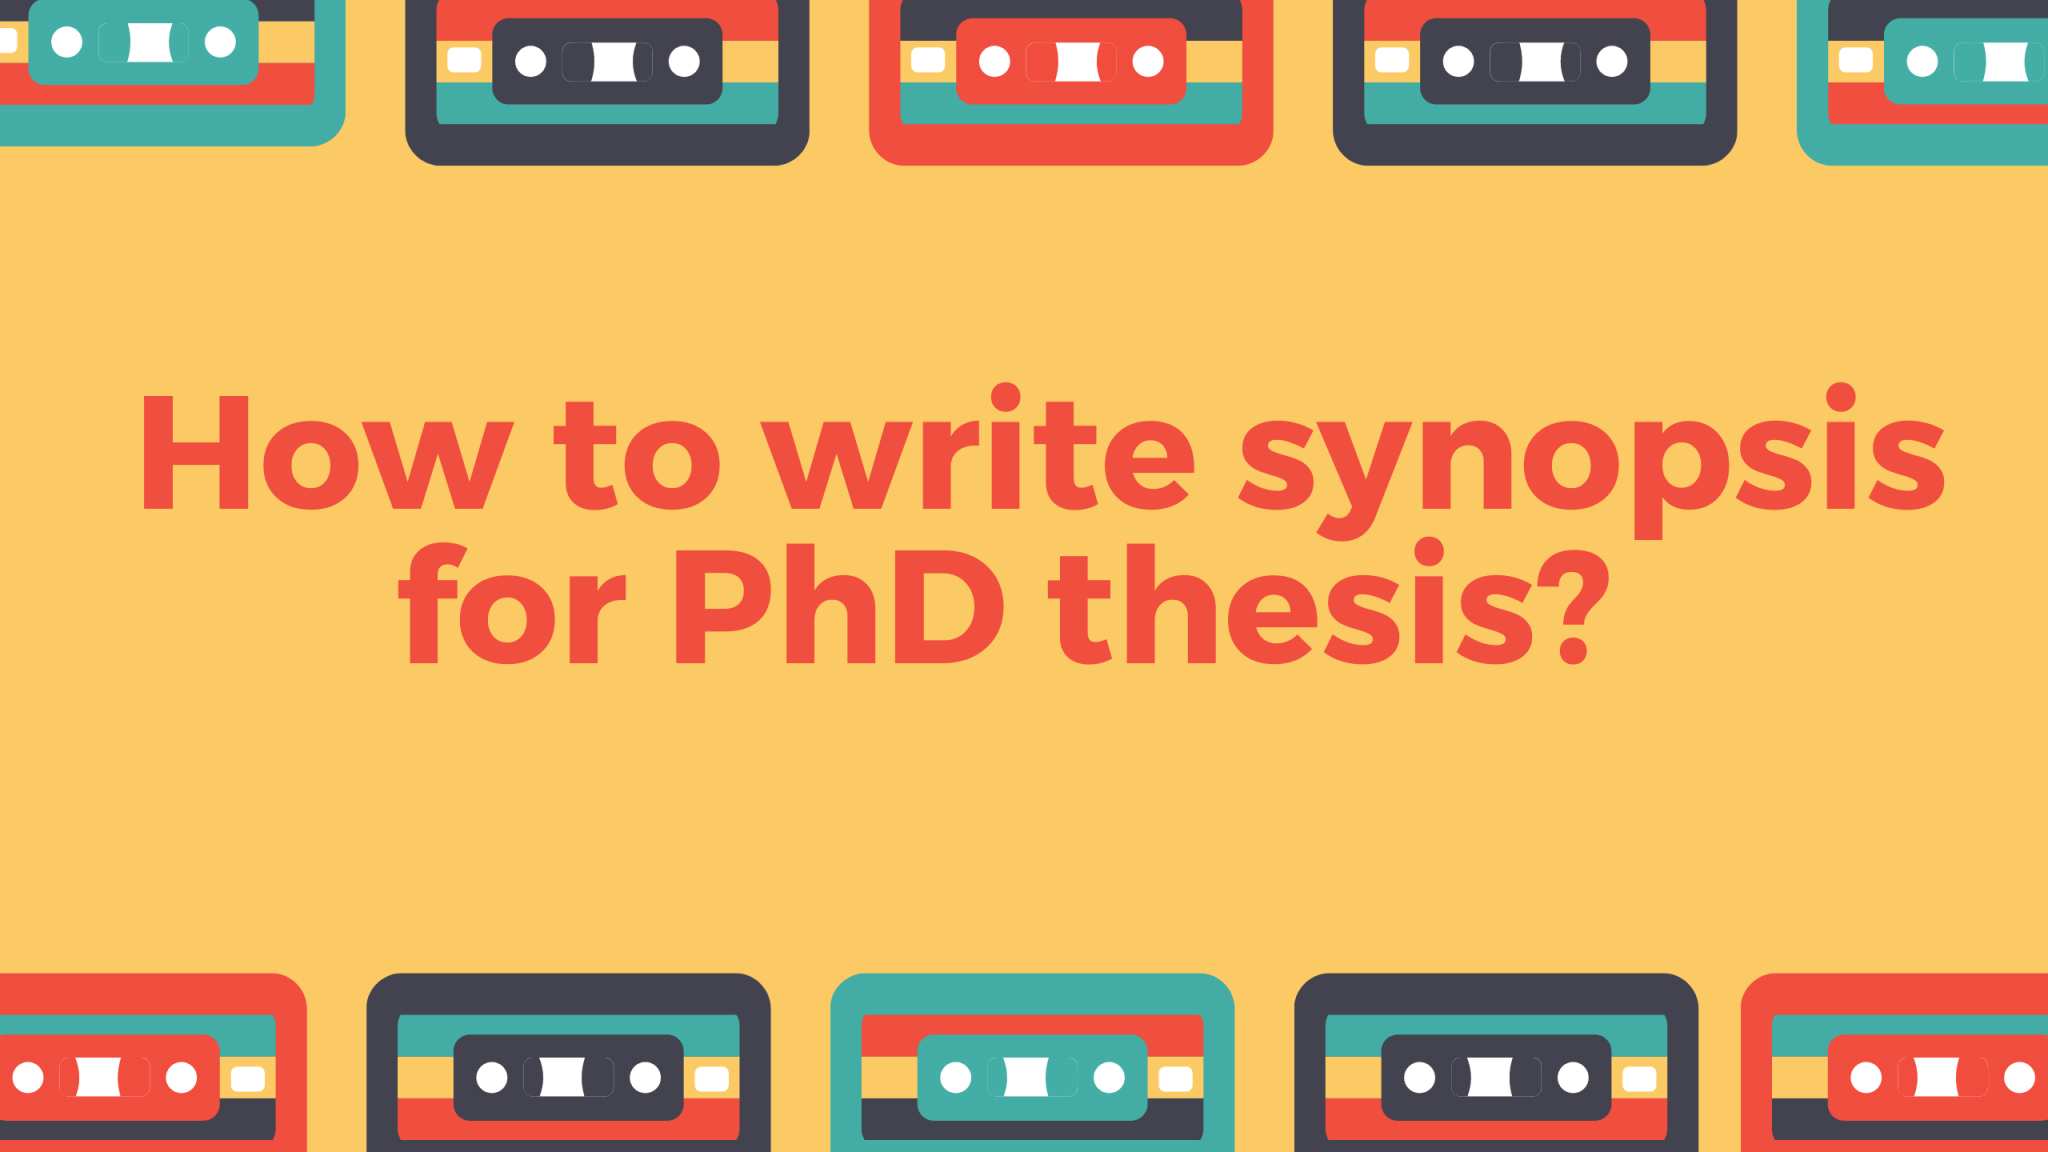 ph.d checklist for synopsis and thesis submission